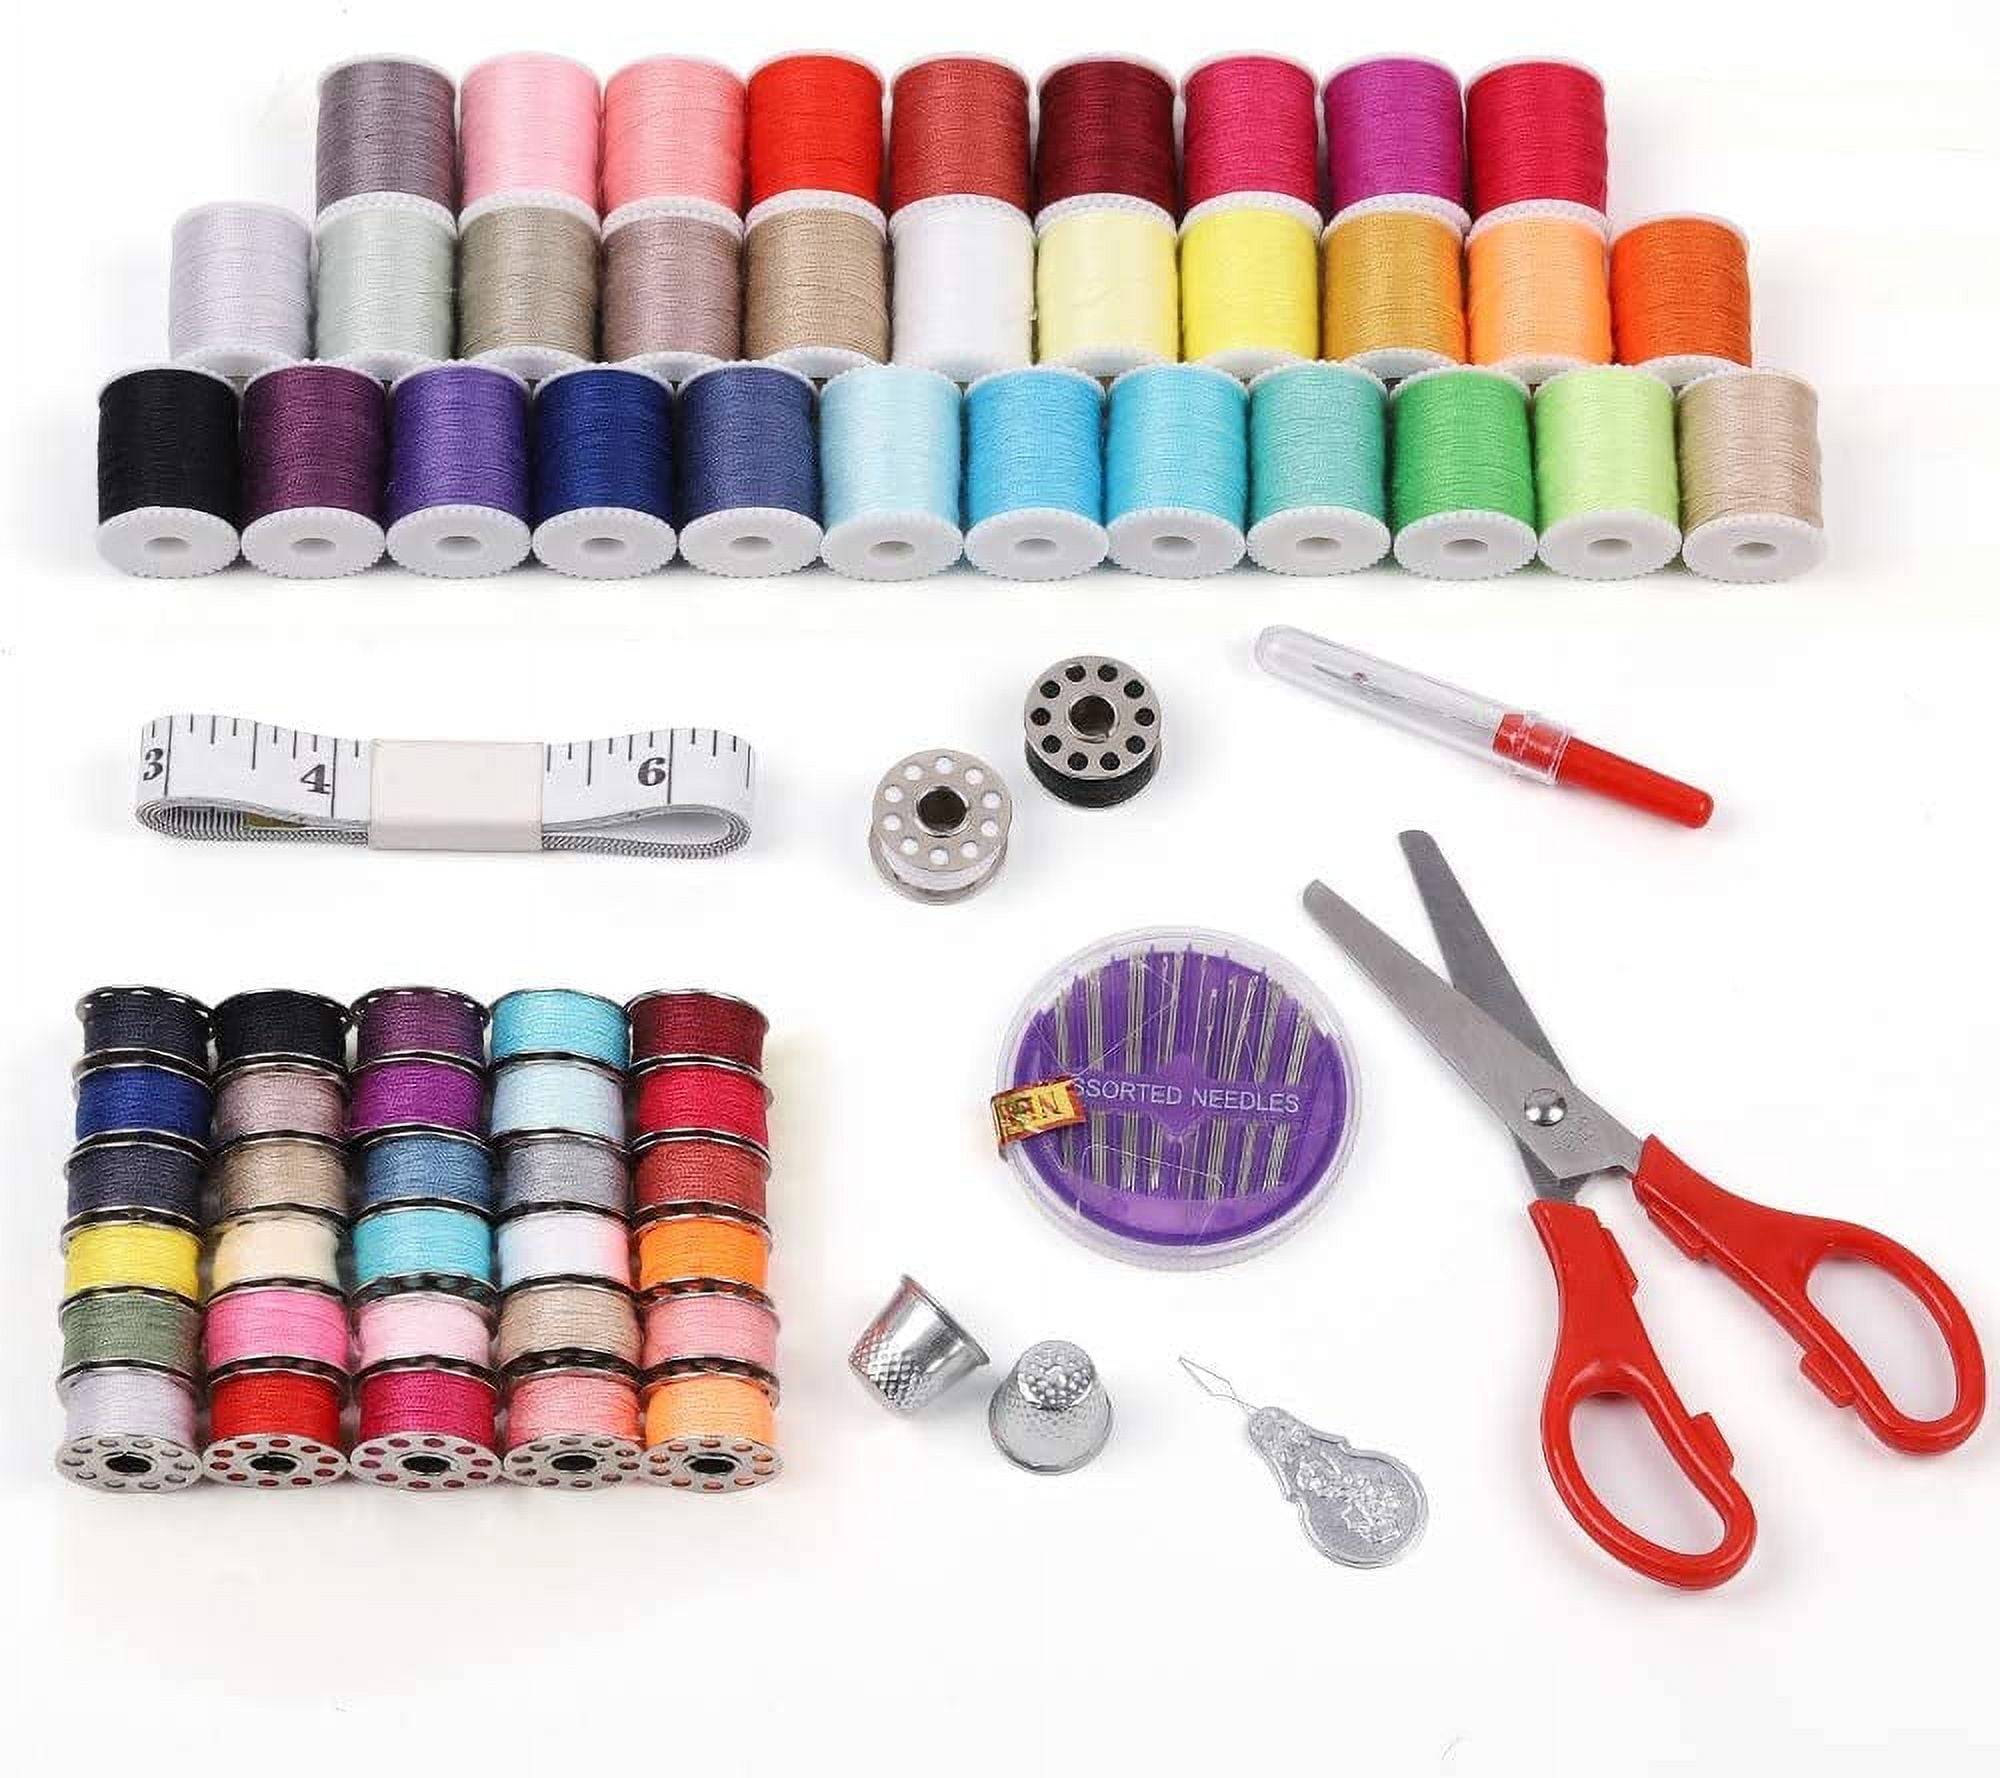  Sewing Kit, OFONE 72 PCS Sewing Accessories and Supplies Mini  Sew Tools for Adults Kids Traveler Beginner Emergency Filled with Threads  Scissors Thimble Needles Tape Measure Carrying Zipper Case Etc 